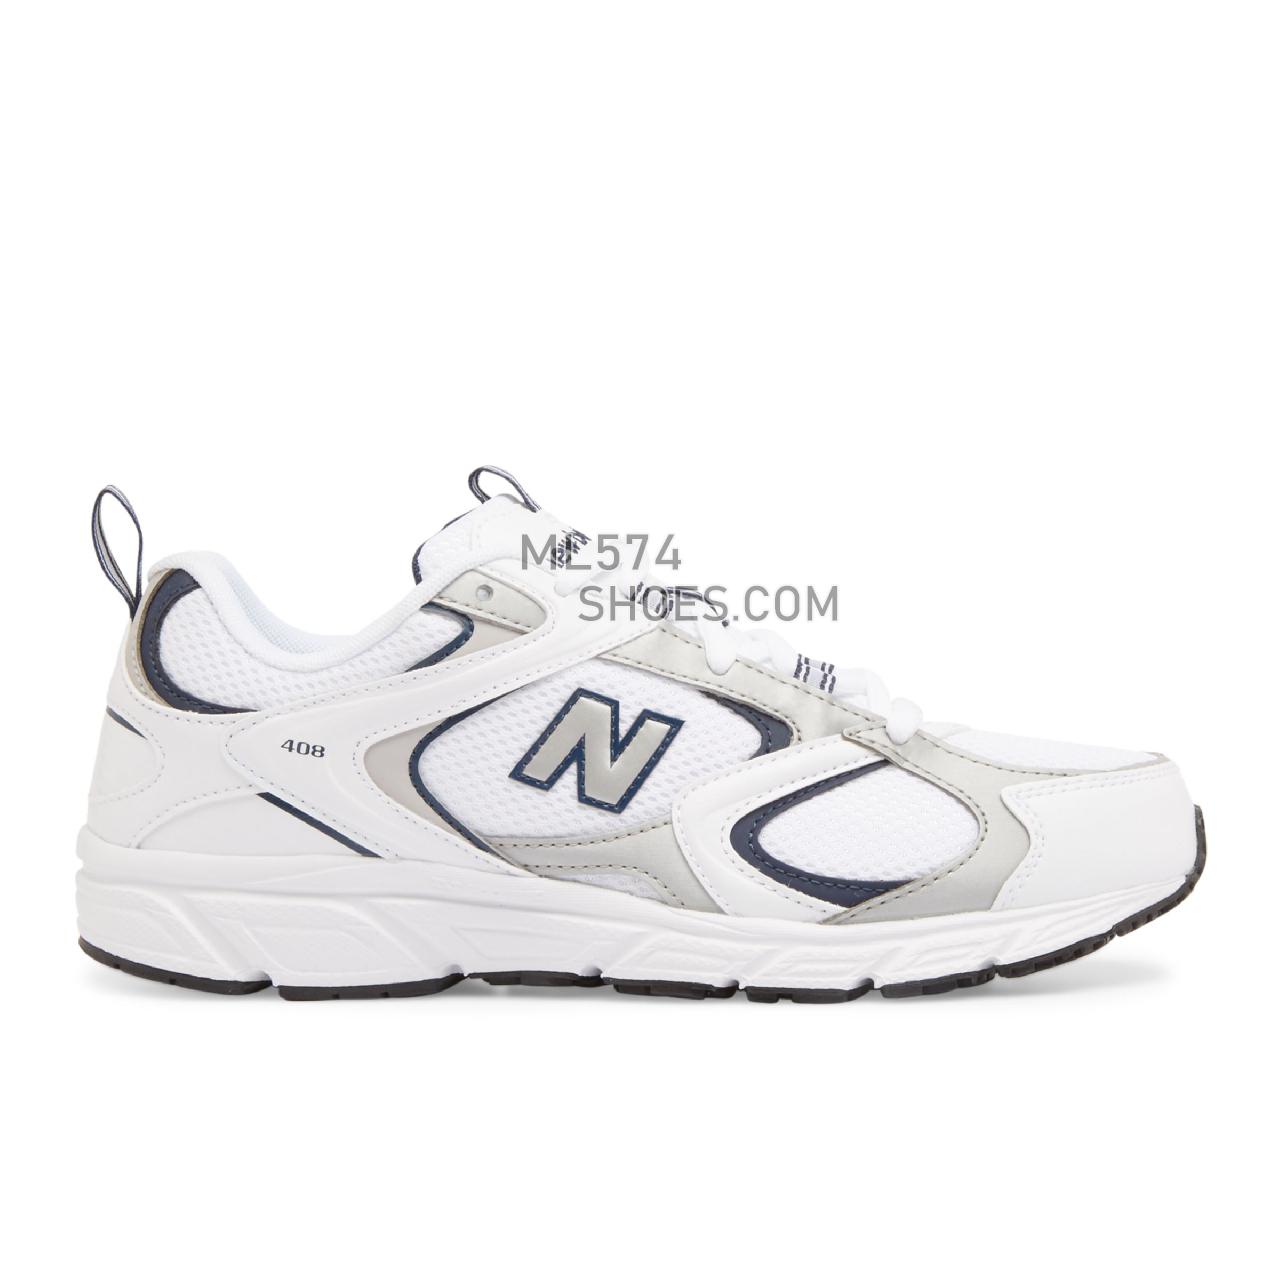 New Balance 408 - Men's Classic Sneakers - Nb White with Natural Indigo - ML408A